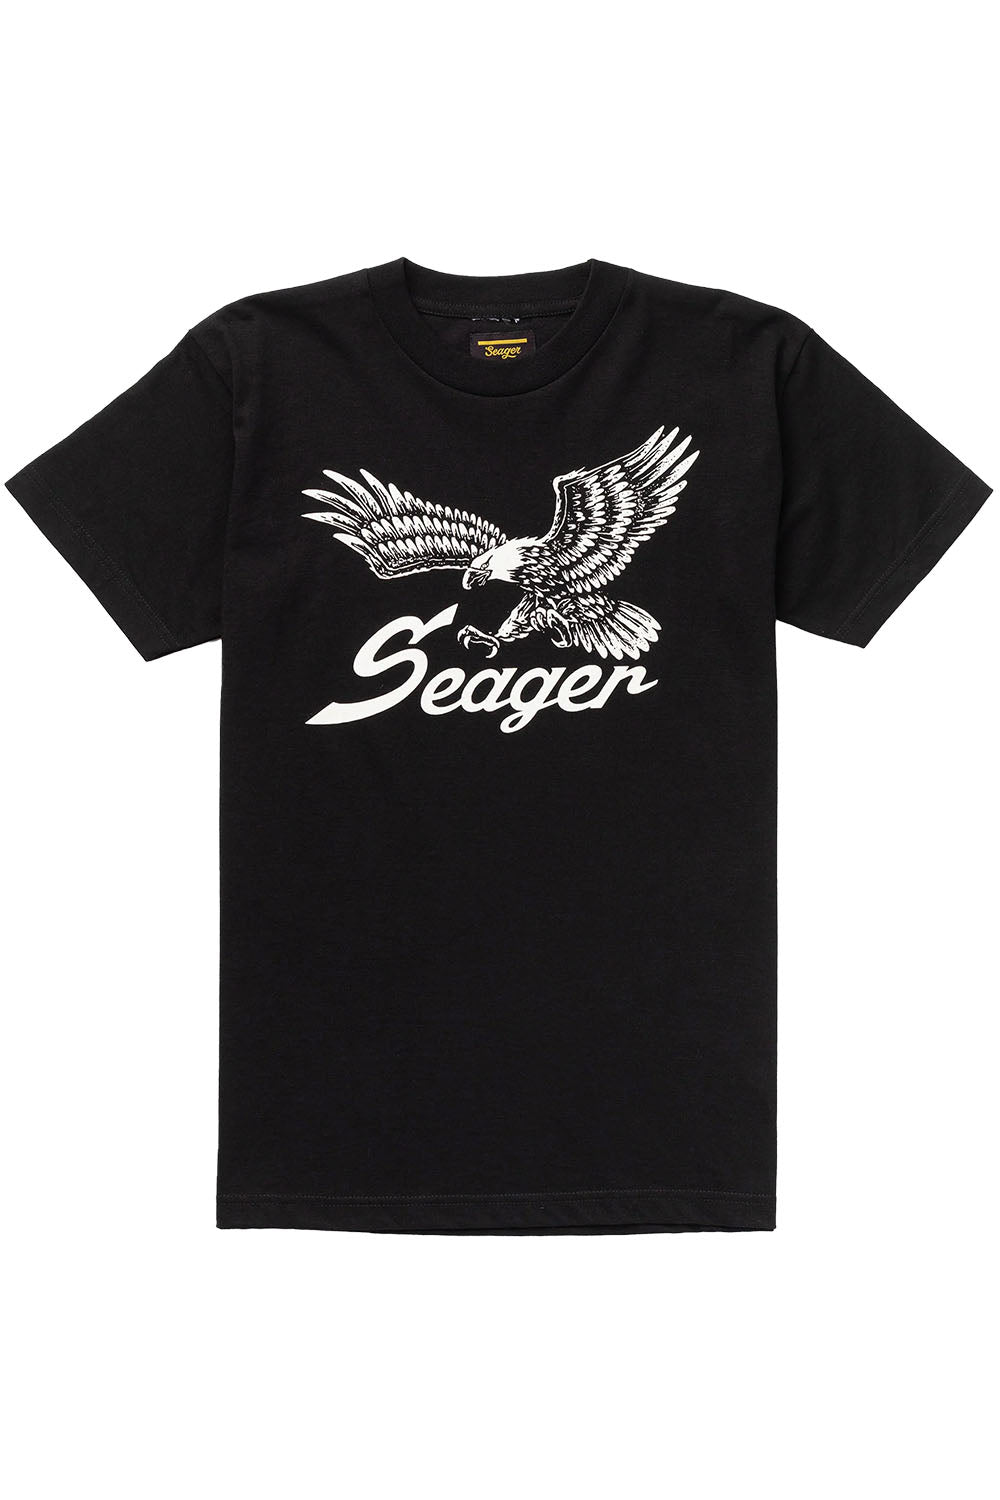 Seager - Wingspan Tee - Black - Front